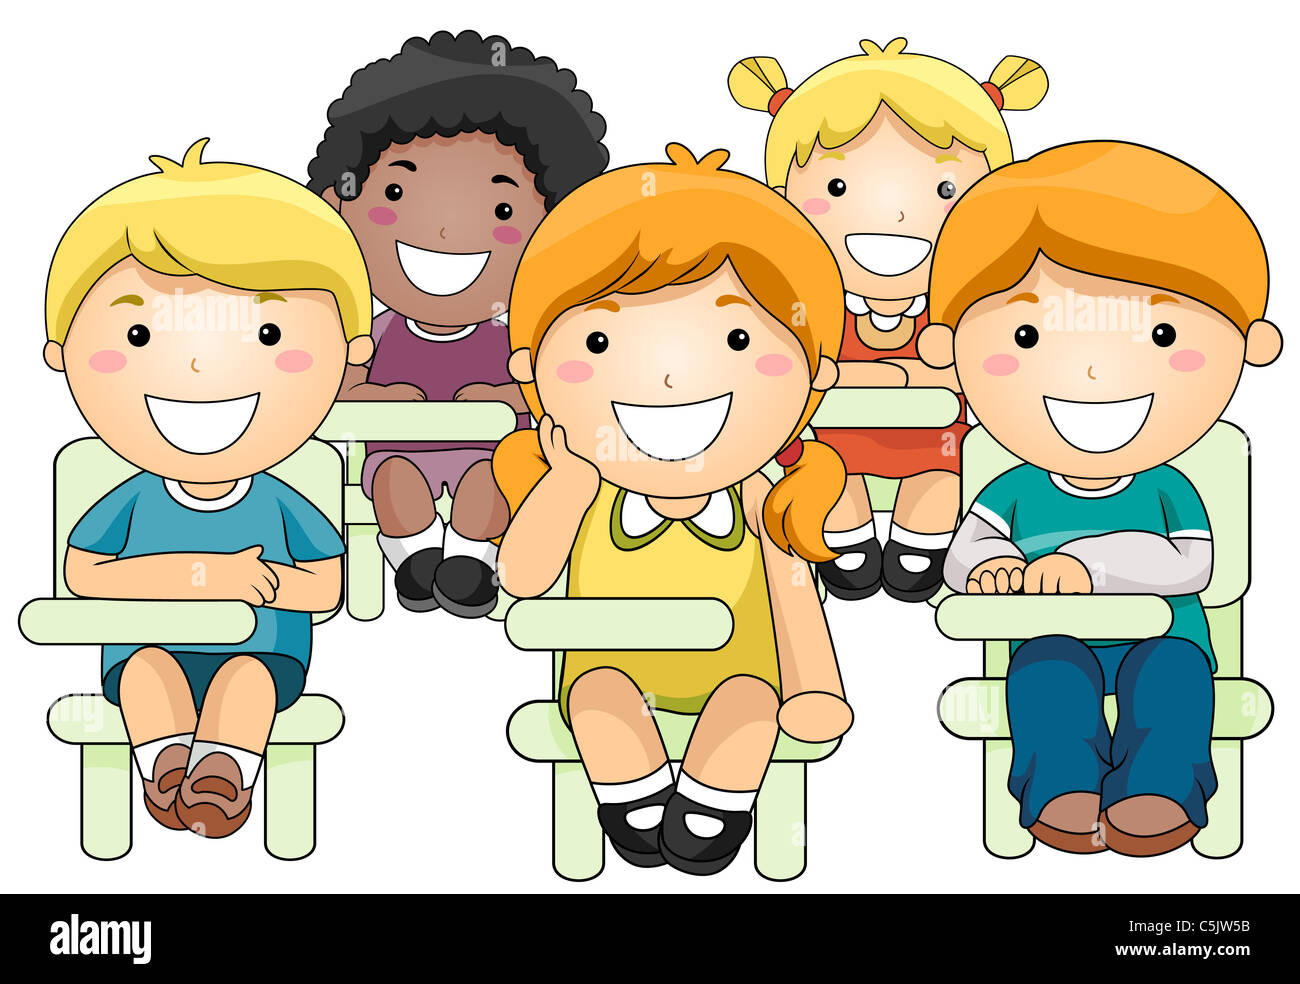 Illustration of a Small Group of Children Inside a Classroom Stock Photo